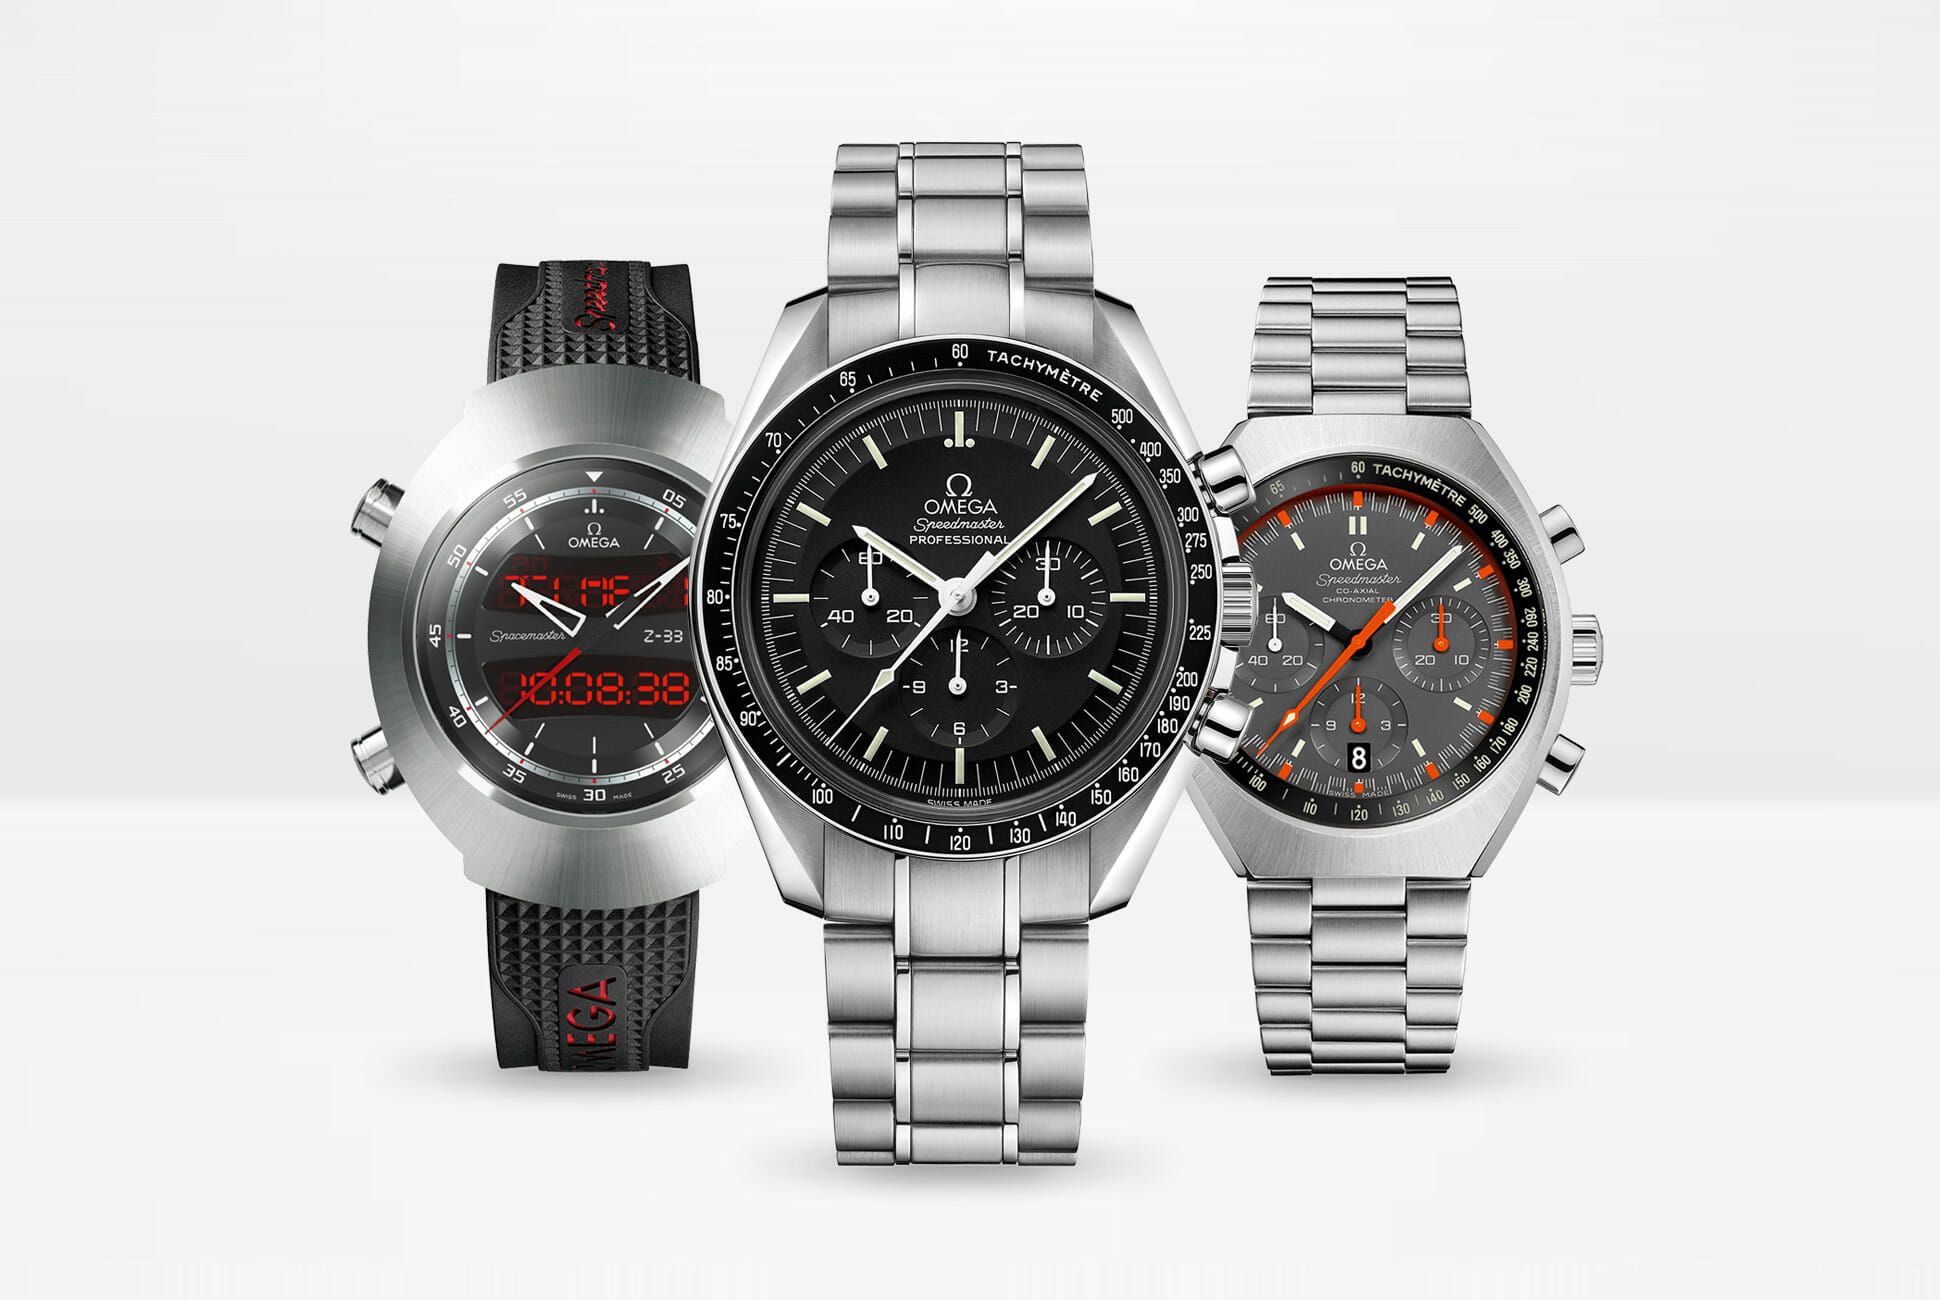 best place to buy omega speedmaster